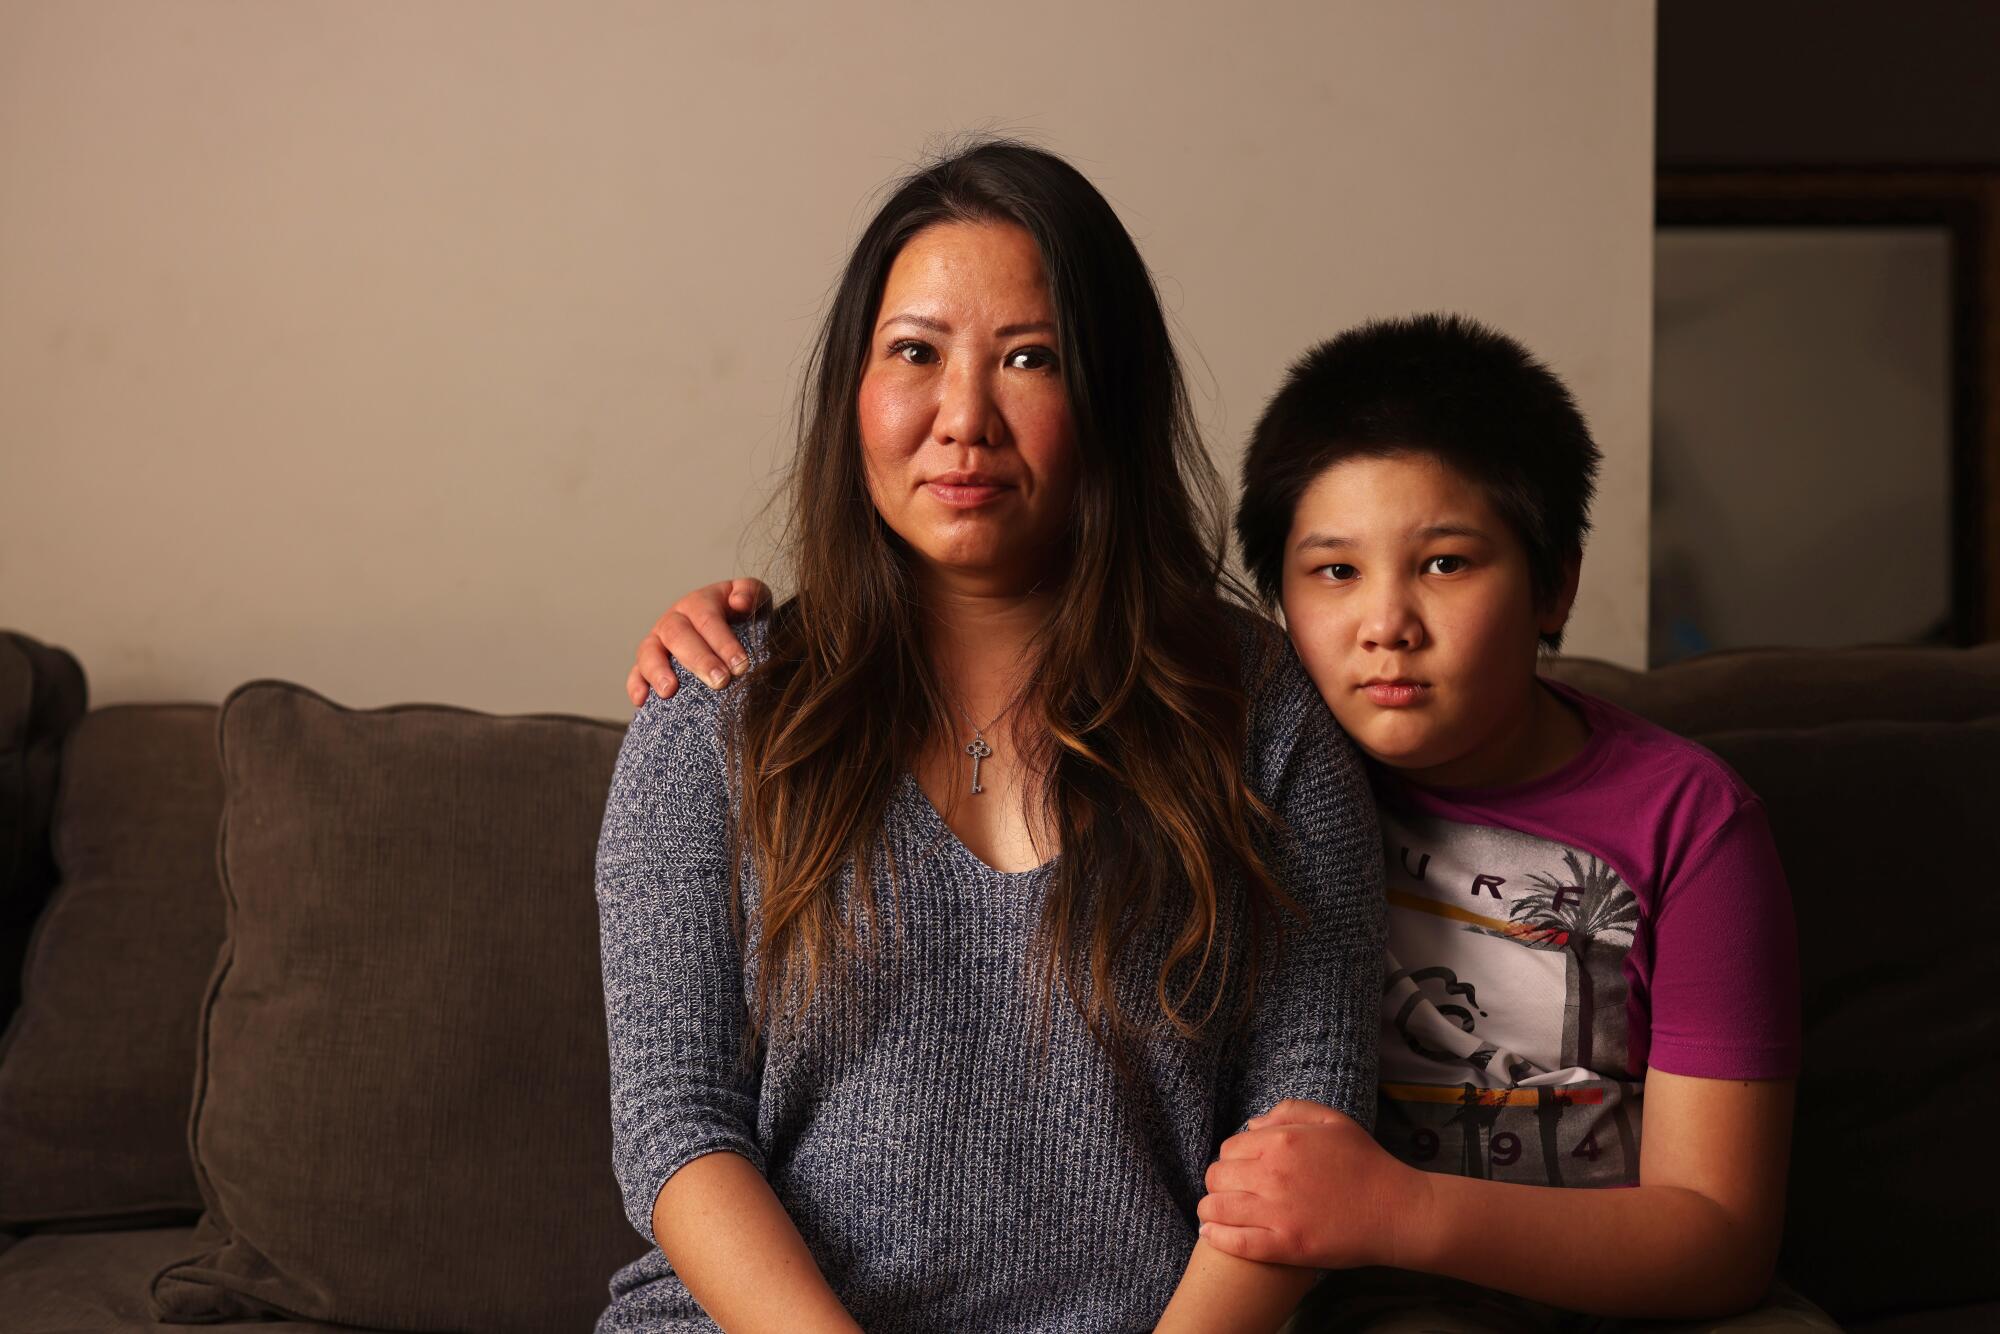 A woman sits on her couch, and her son sits next to her with his arms around her